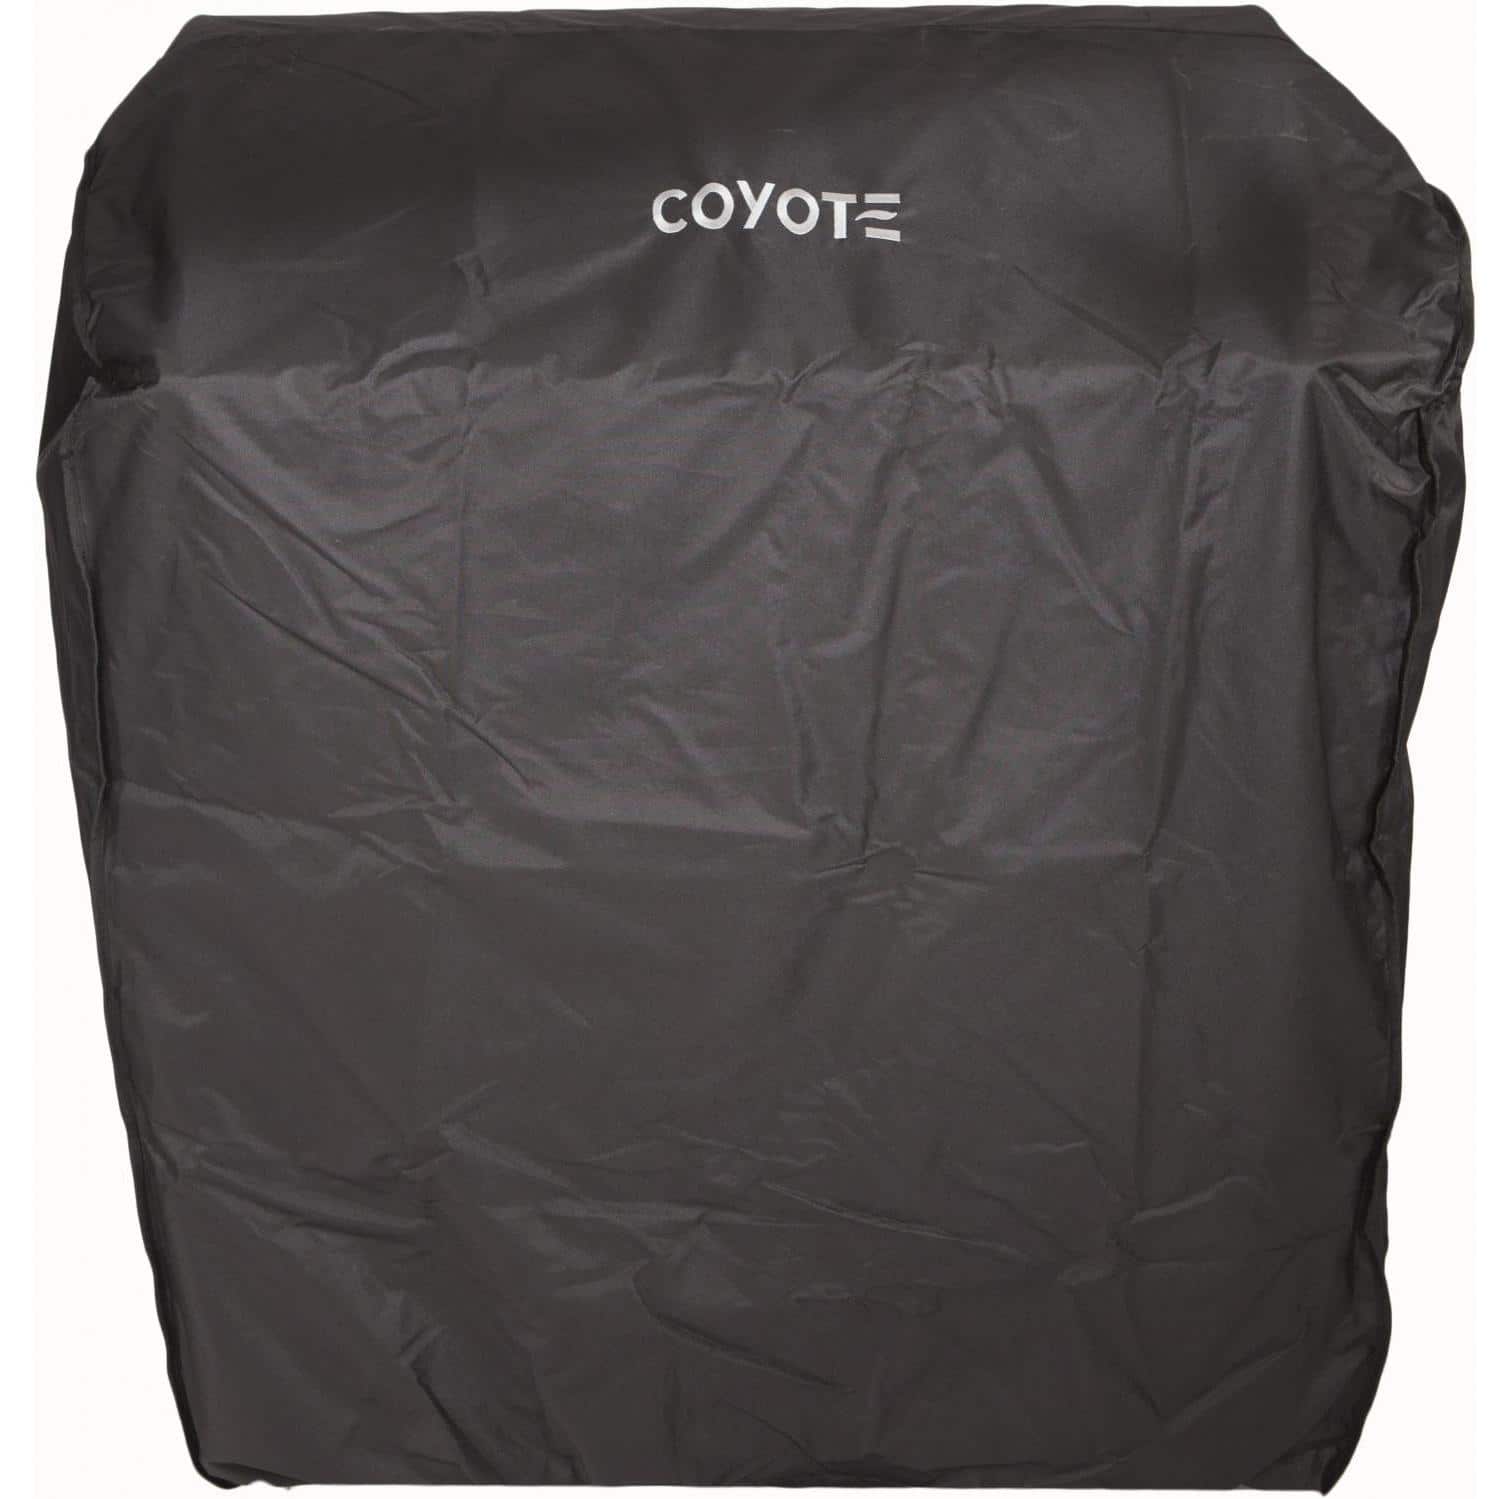 Coyote Freestanding Grill Covers